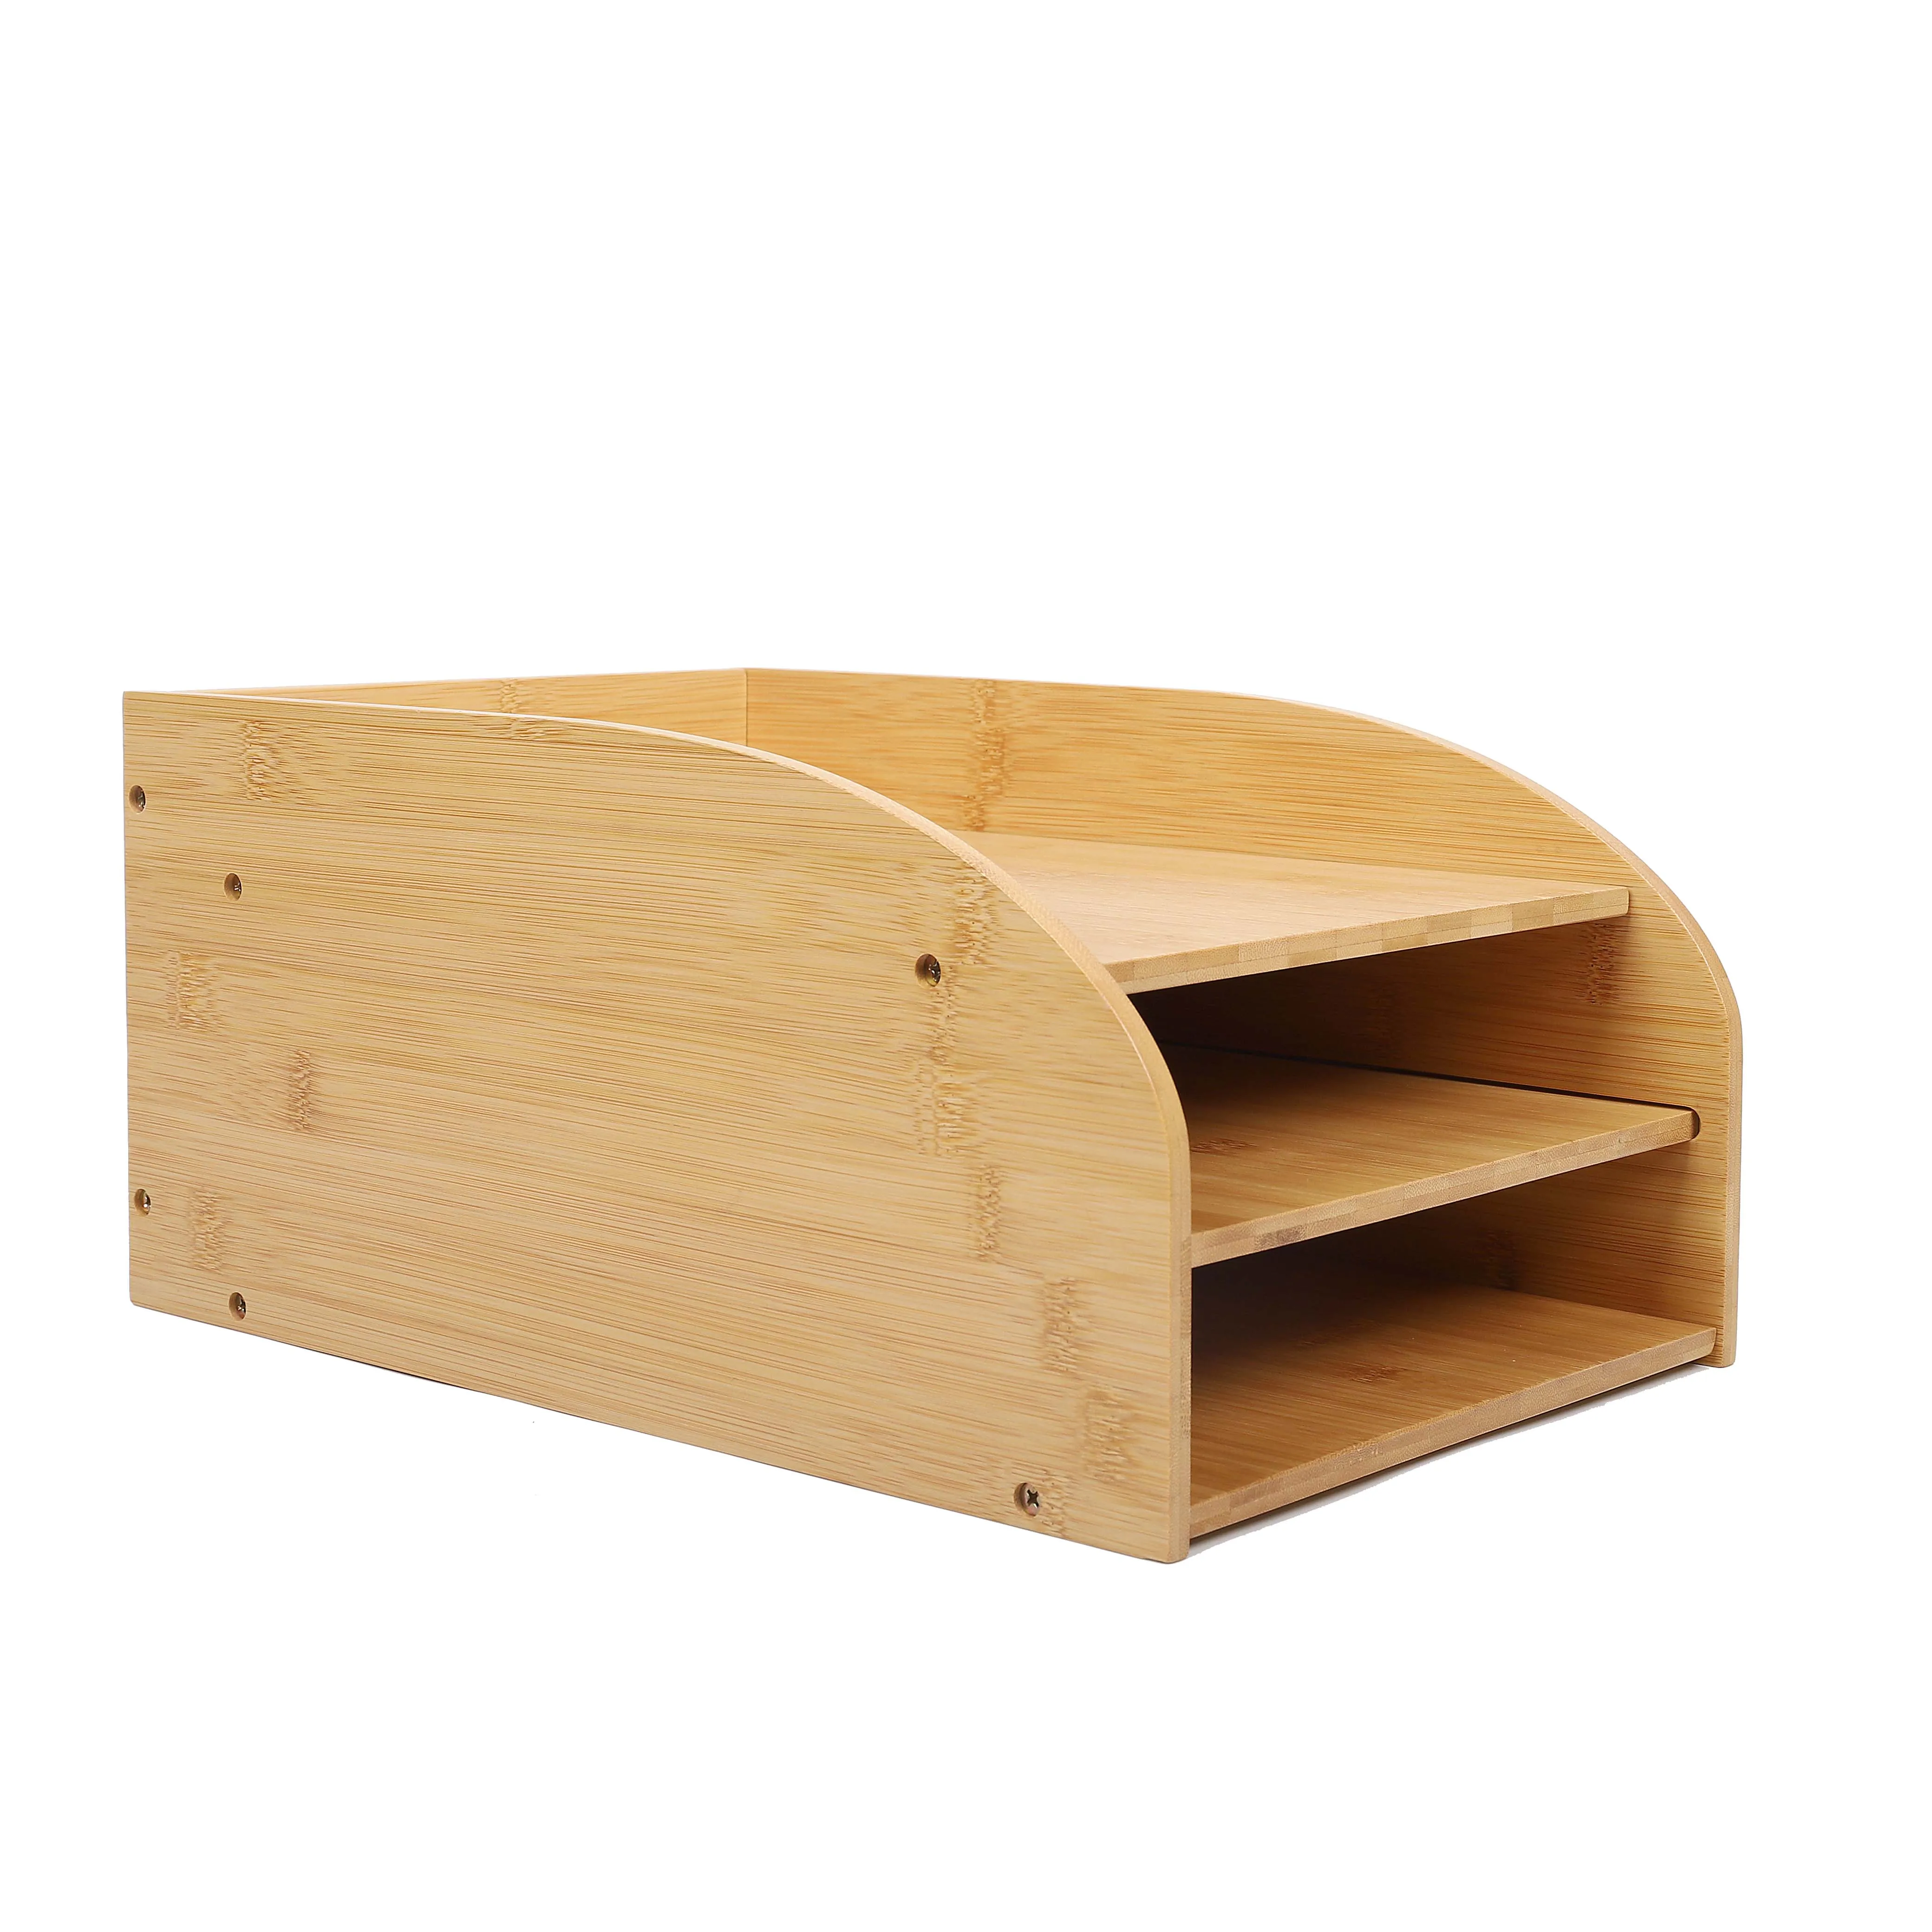 
bamboo A4 paper desk storage organizer with Drawers for Home system letter for table office desk 